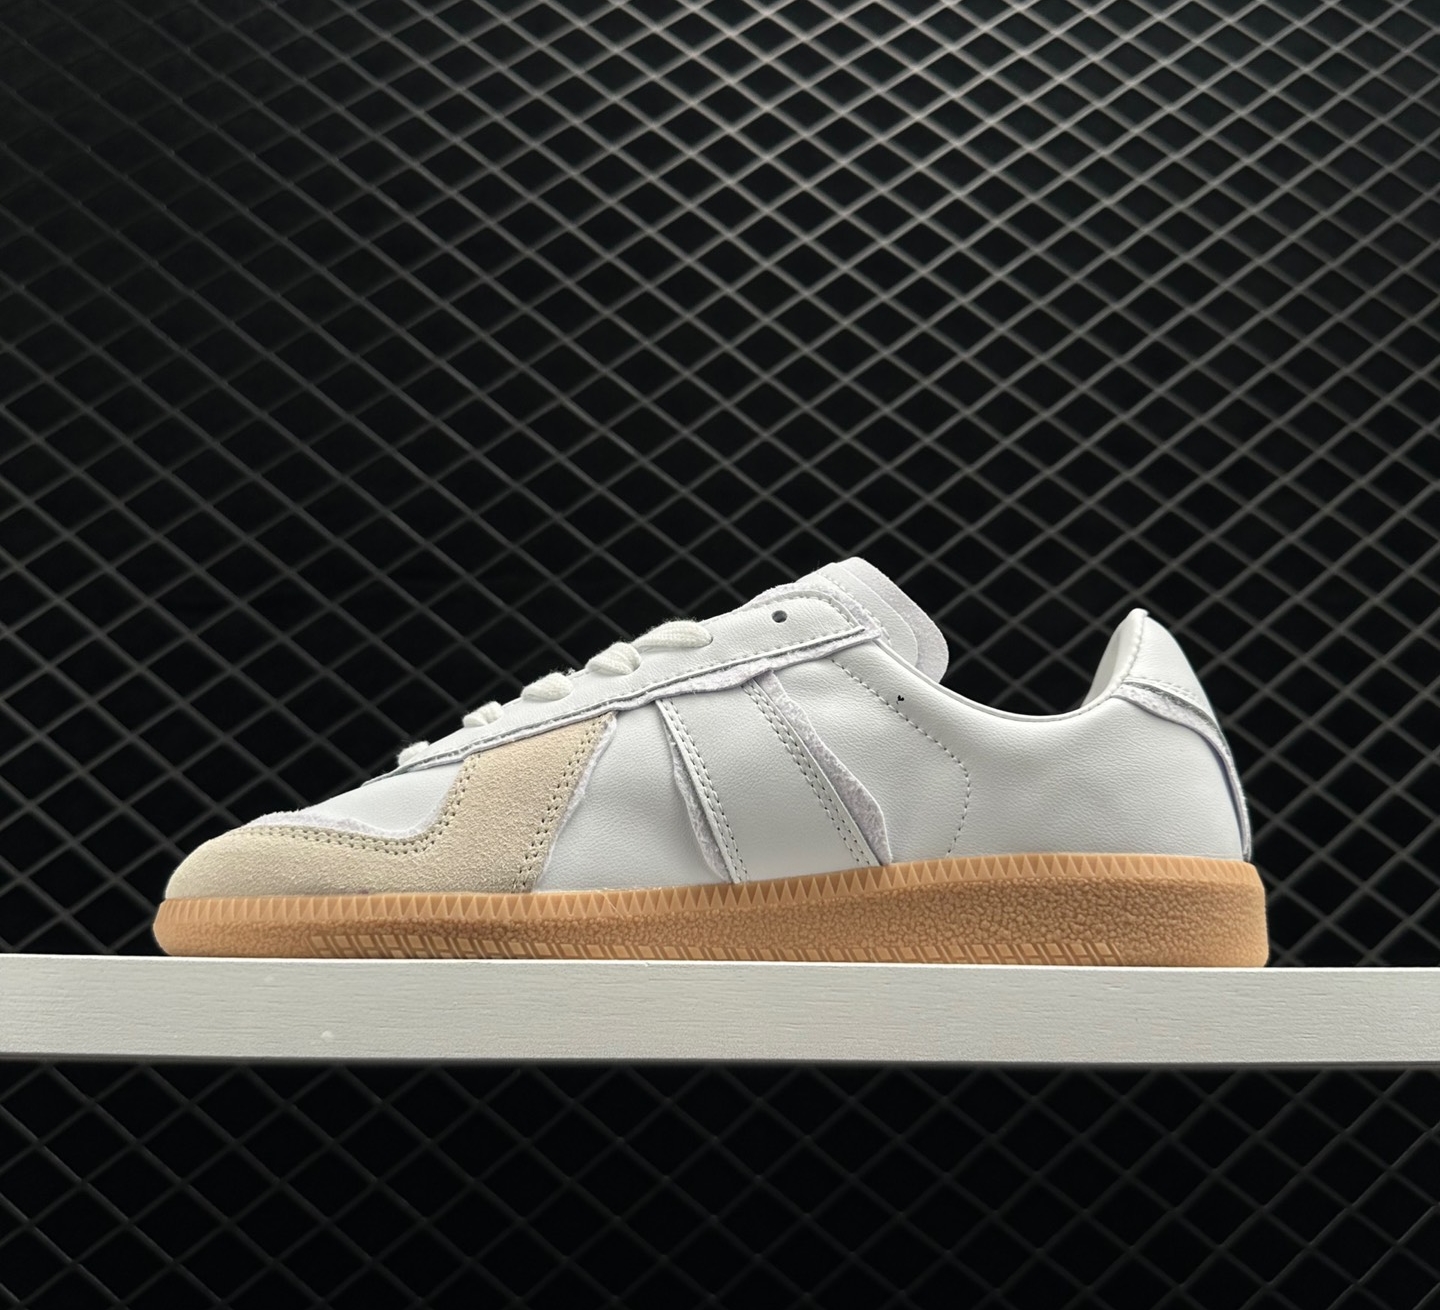 Adidas Originals Bw Army White HQ8512 - Iconic Retro Sneakers at Their Best